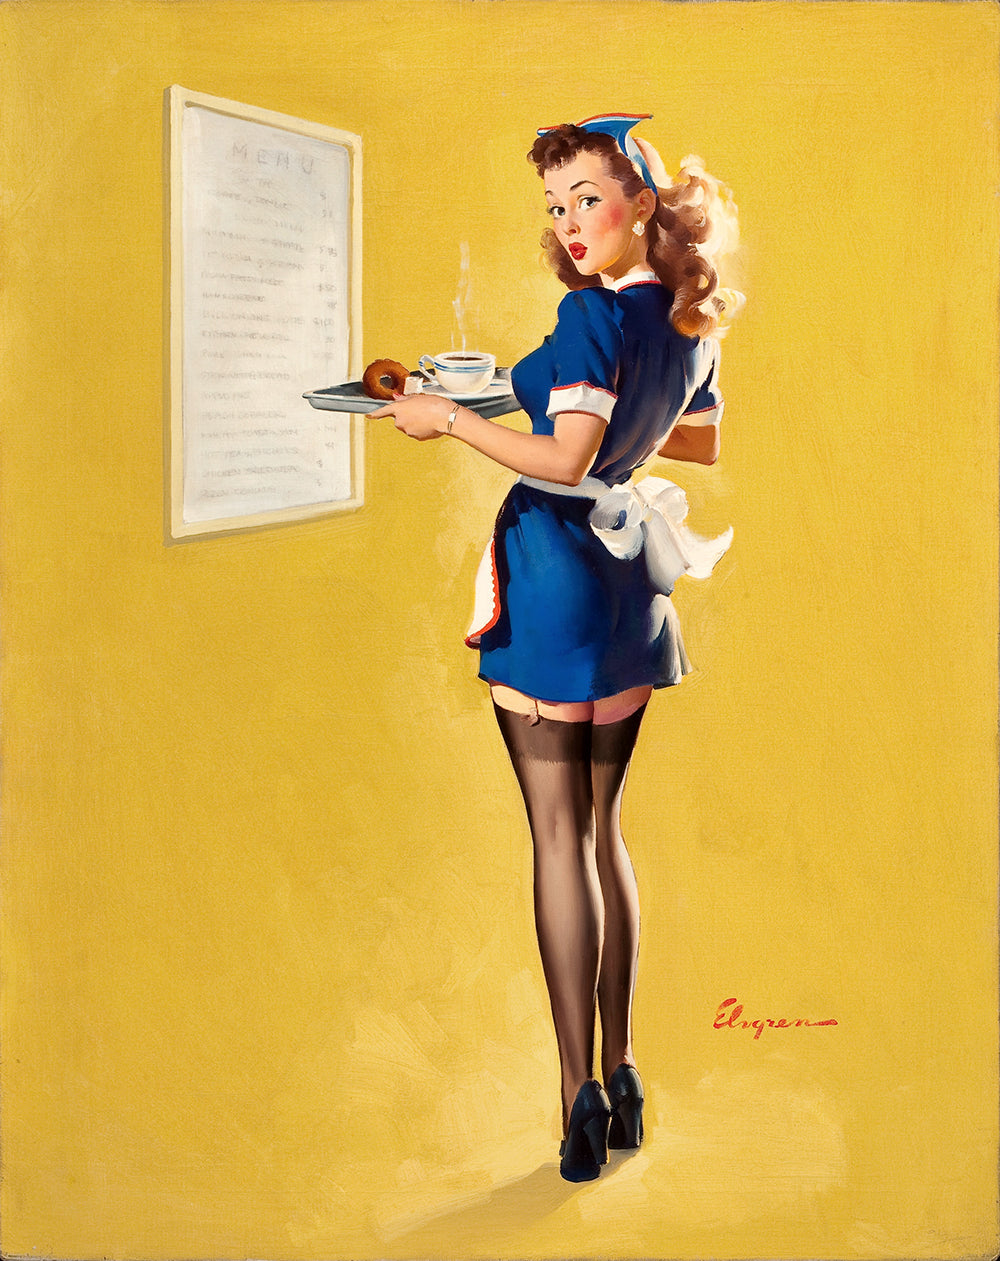 ON THE MENUE. or THINGS ARE AWFULLY HIGH by Gil Elvgren